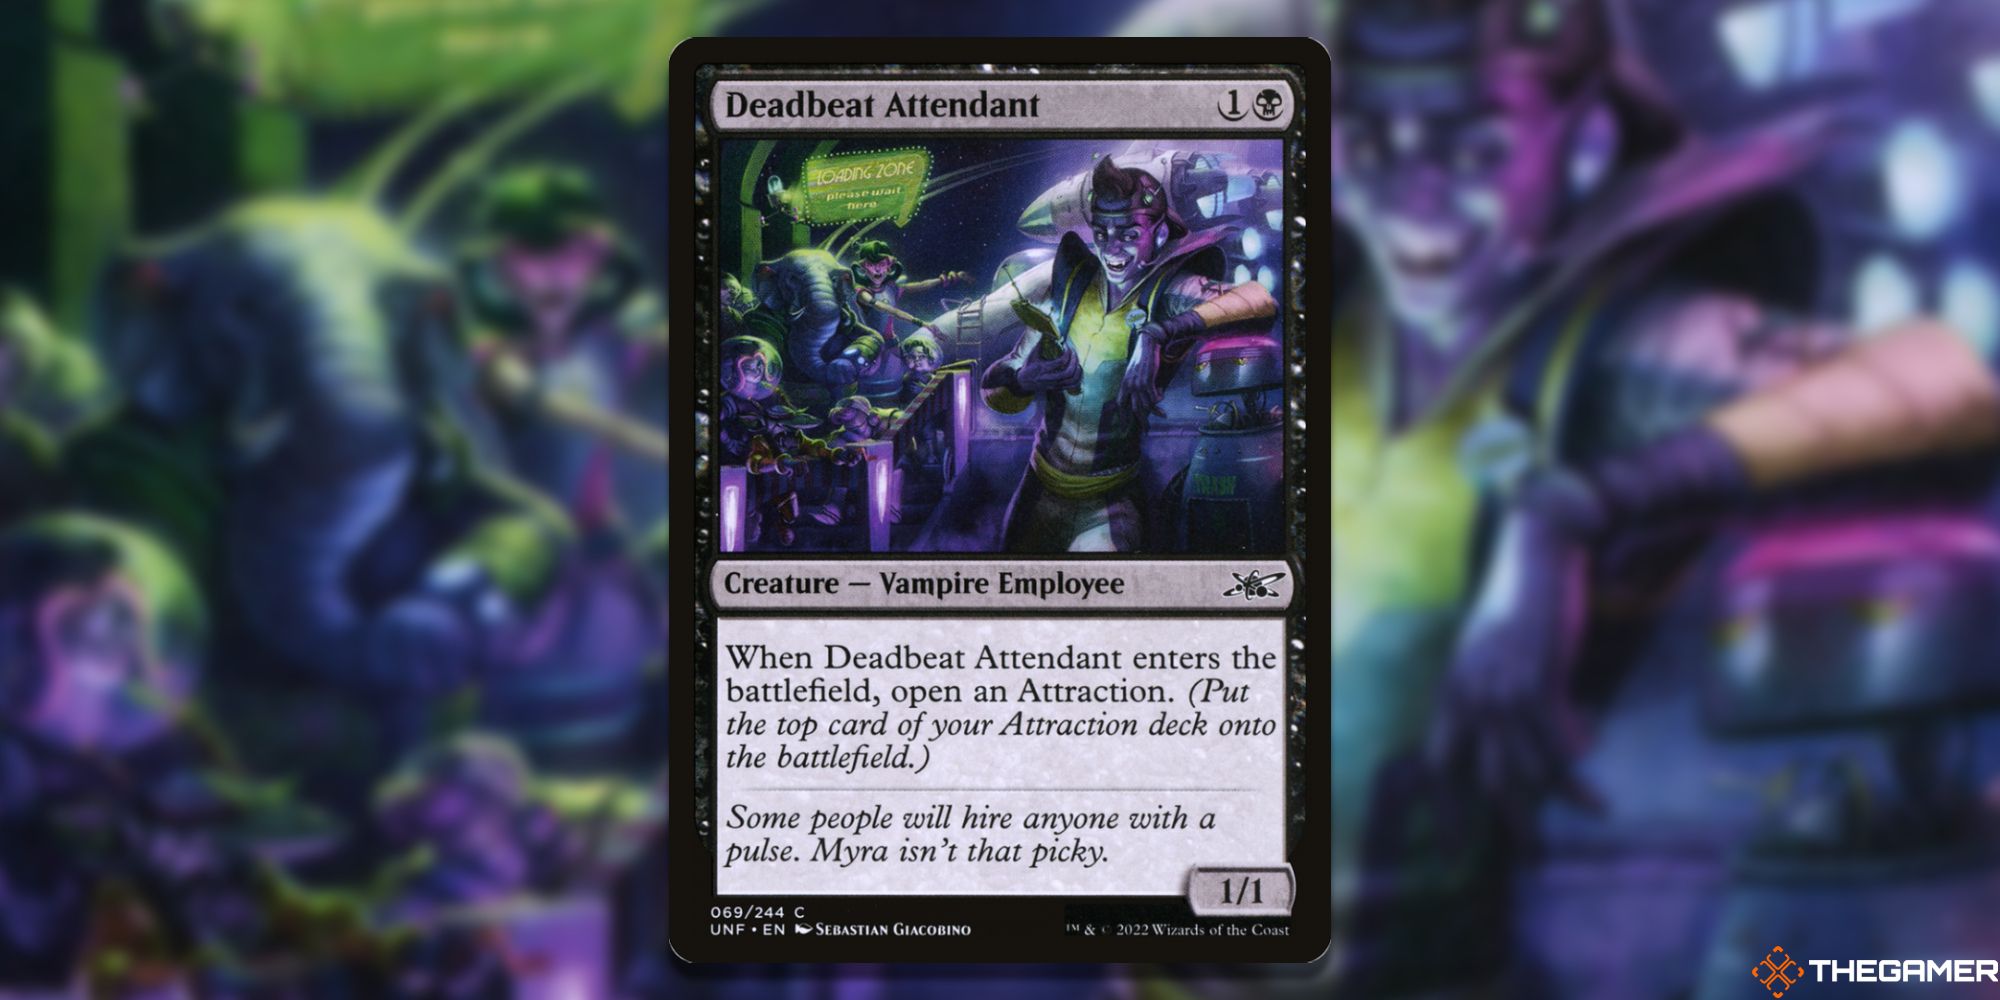 Image of the Deadbeat Attendant card in Magic: The Gathering, with art by Sebastian Giacobino